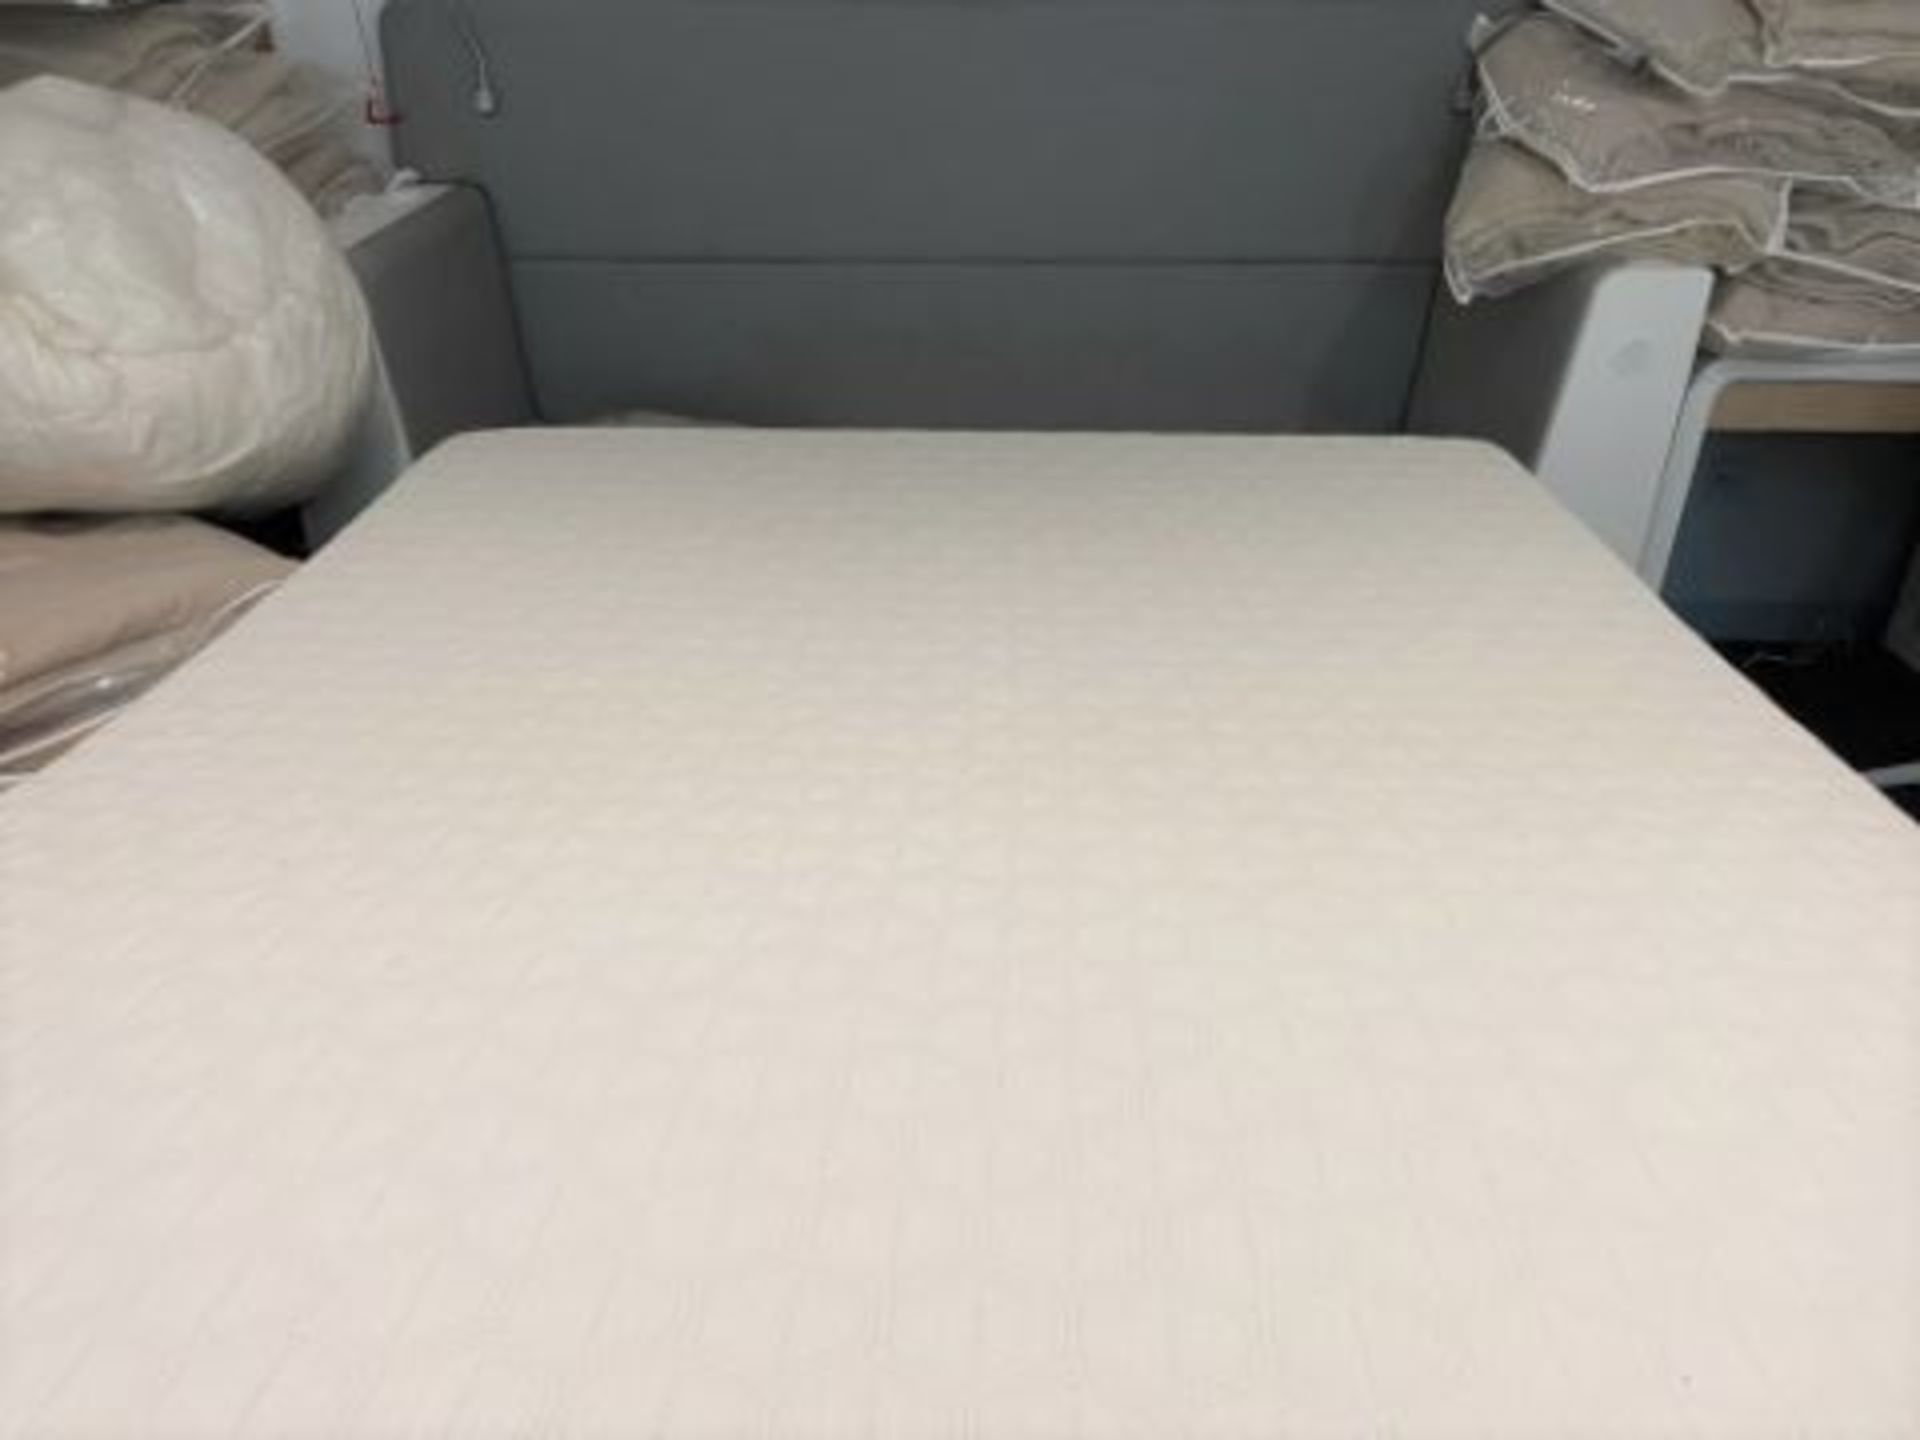 1 x Double Adjustable Space Saving Smart Bed With Serta Motion Memory Foam Mattress - Signature - Image 5 of 12